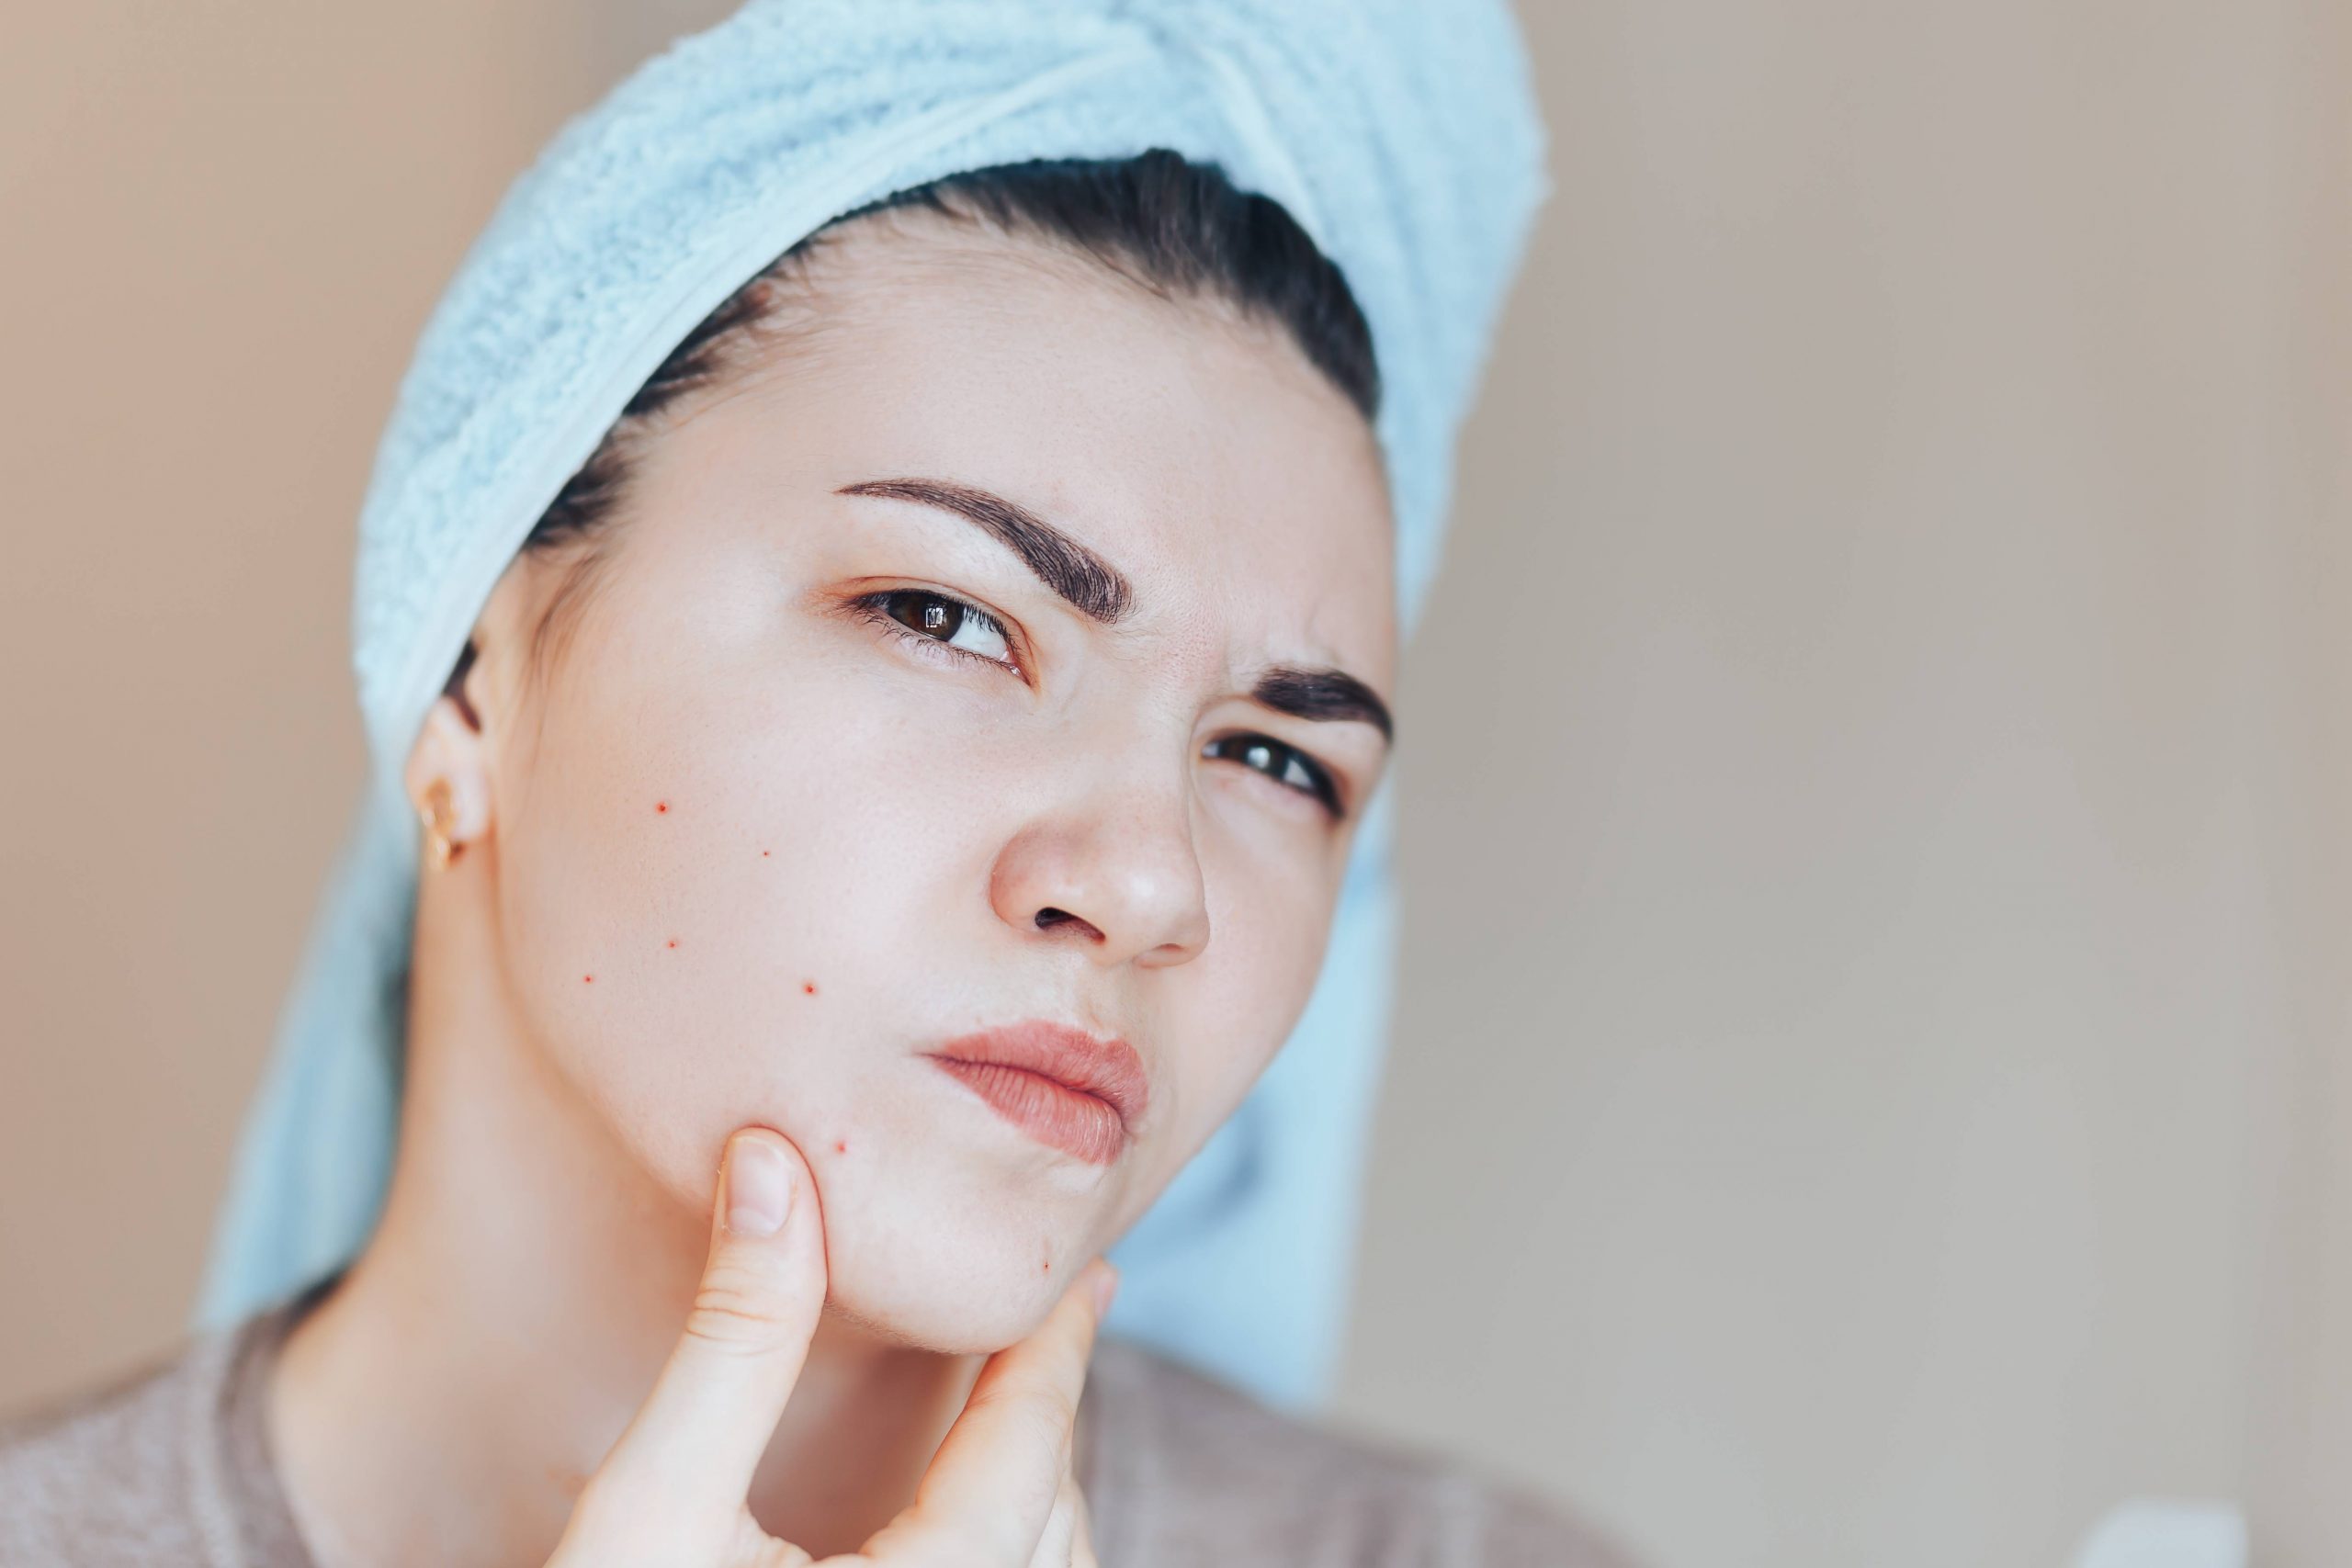 Top 7 Affordable Acne Products Under $20